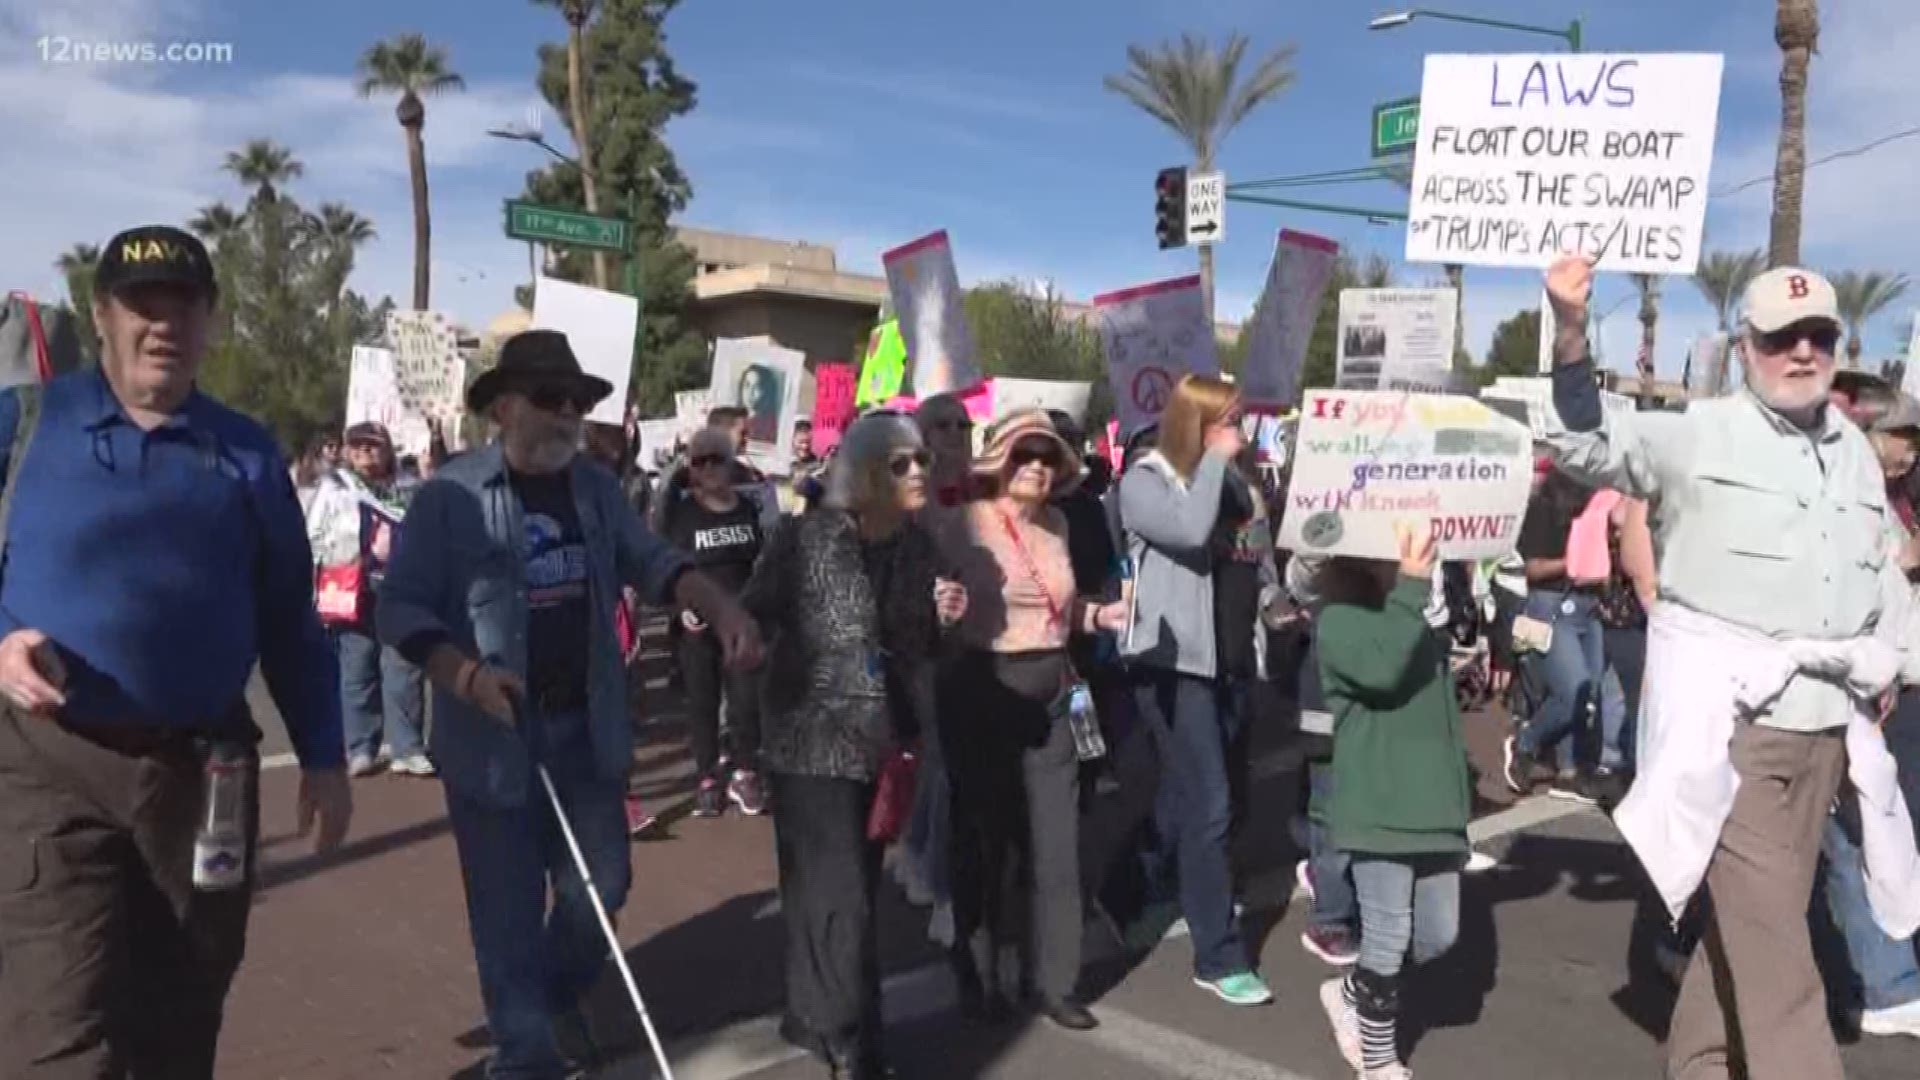 Organizers say the Phoenix chapter of the march is focusing on the movement’s success, like the record number of women elected into Congress.